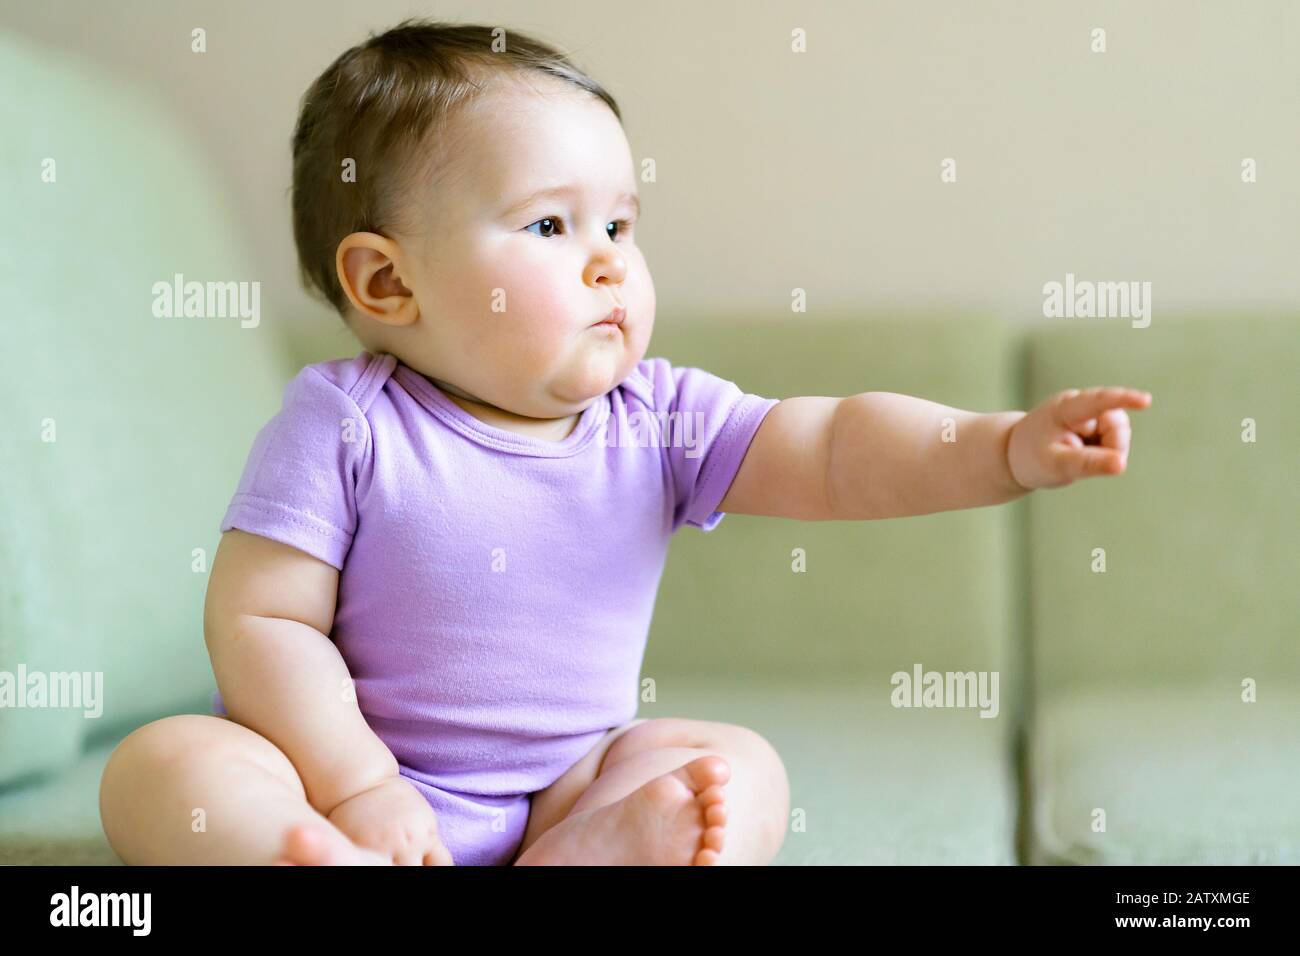 Baby held out his hand and points a finger at something Stock Photo